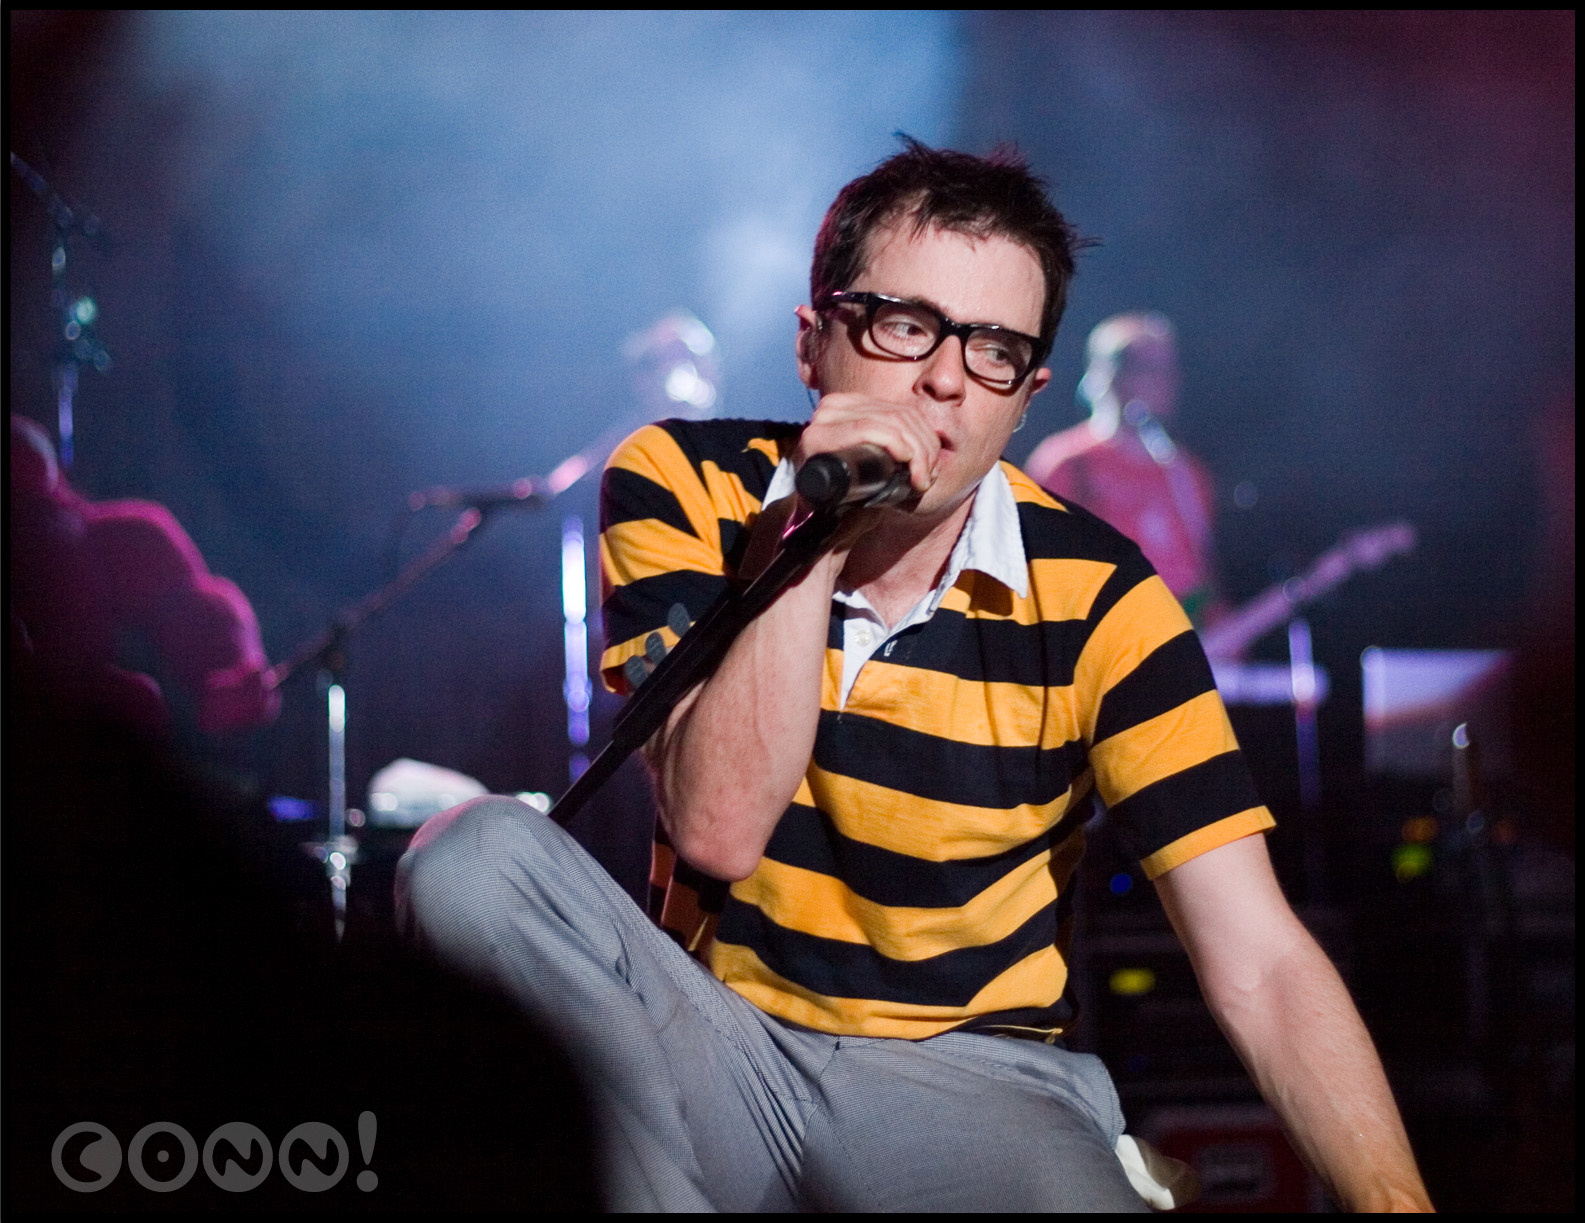 Best Rivers Cuomo Background for mobile